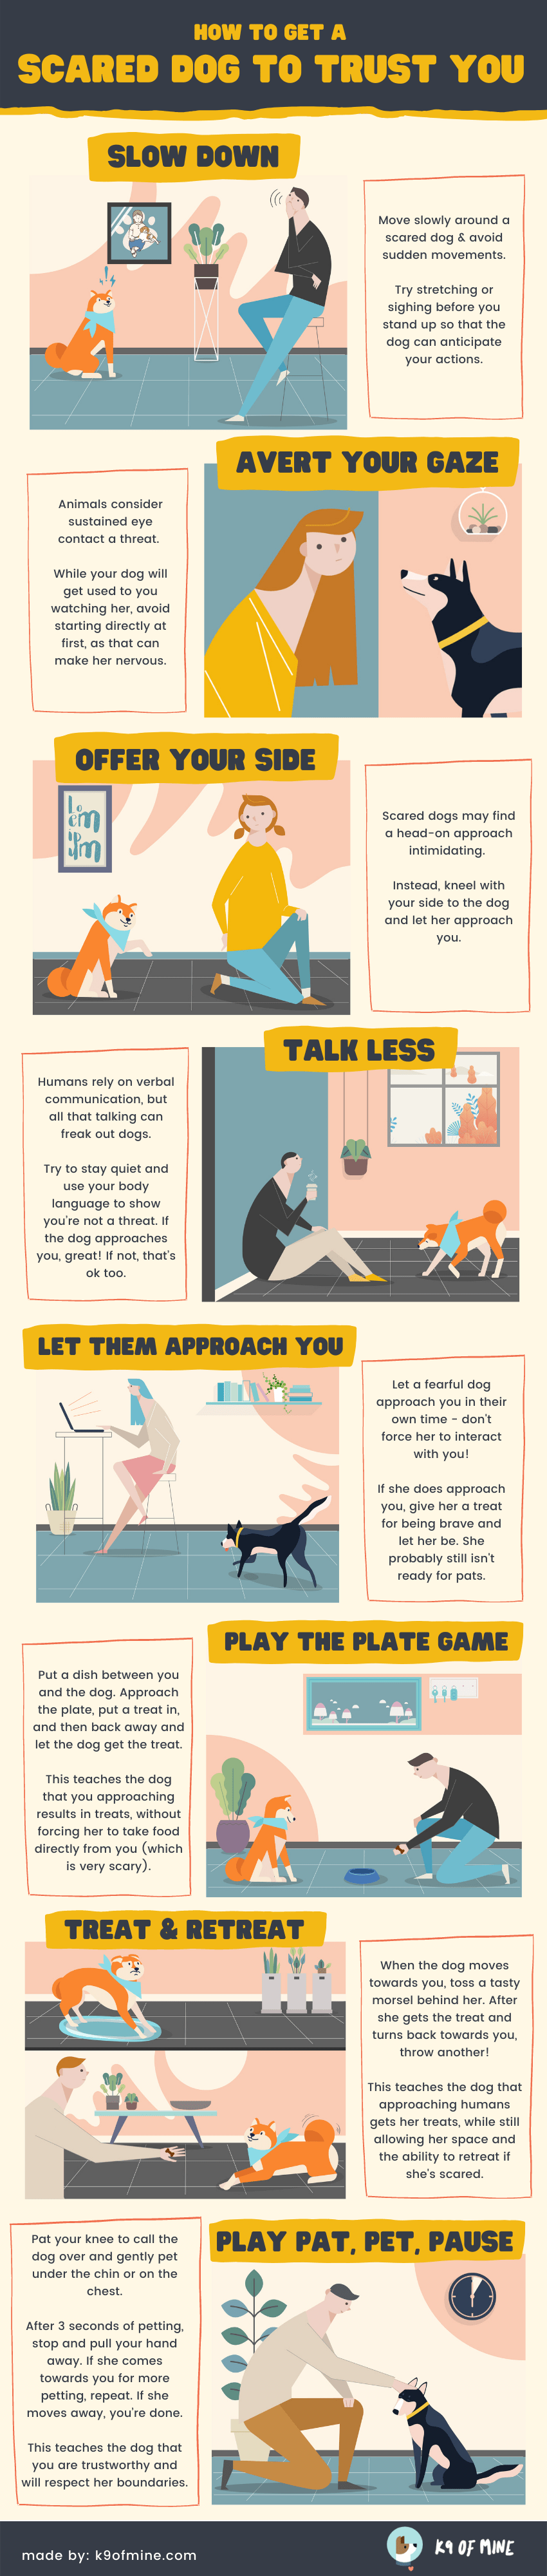 scared dog to trust infographic